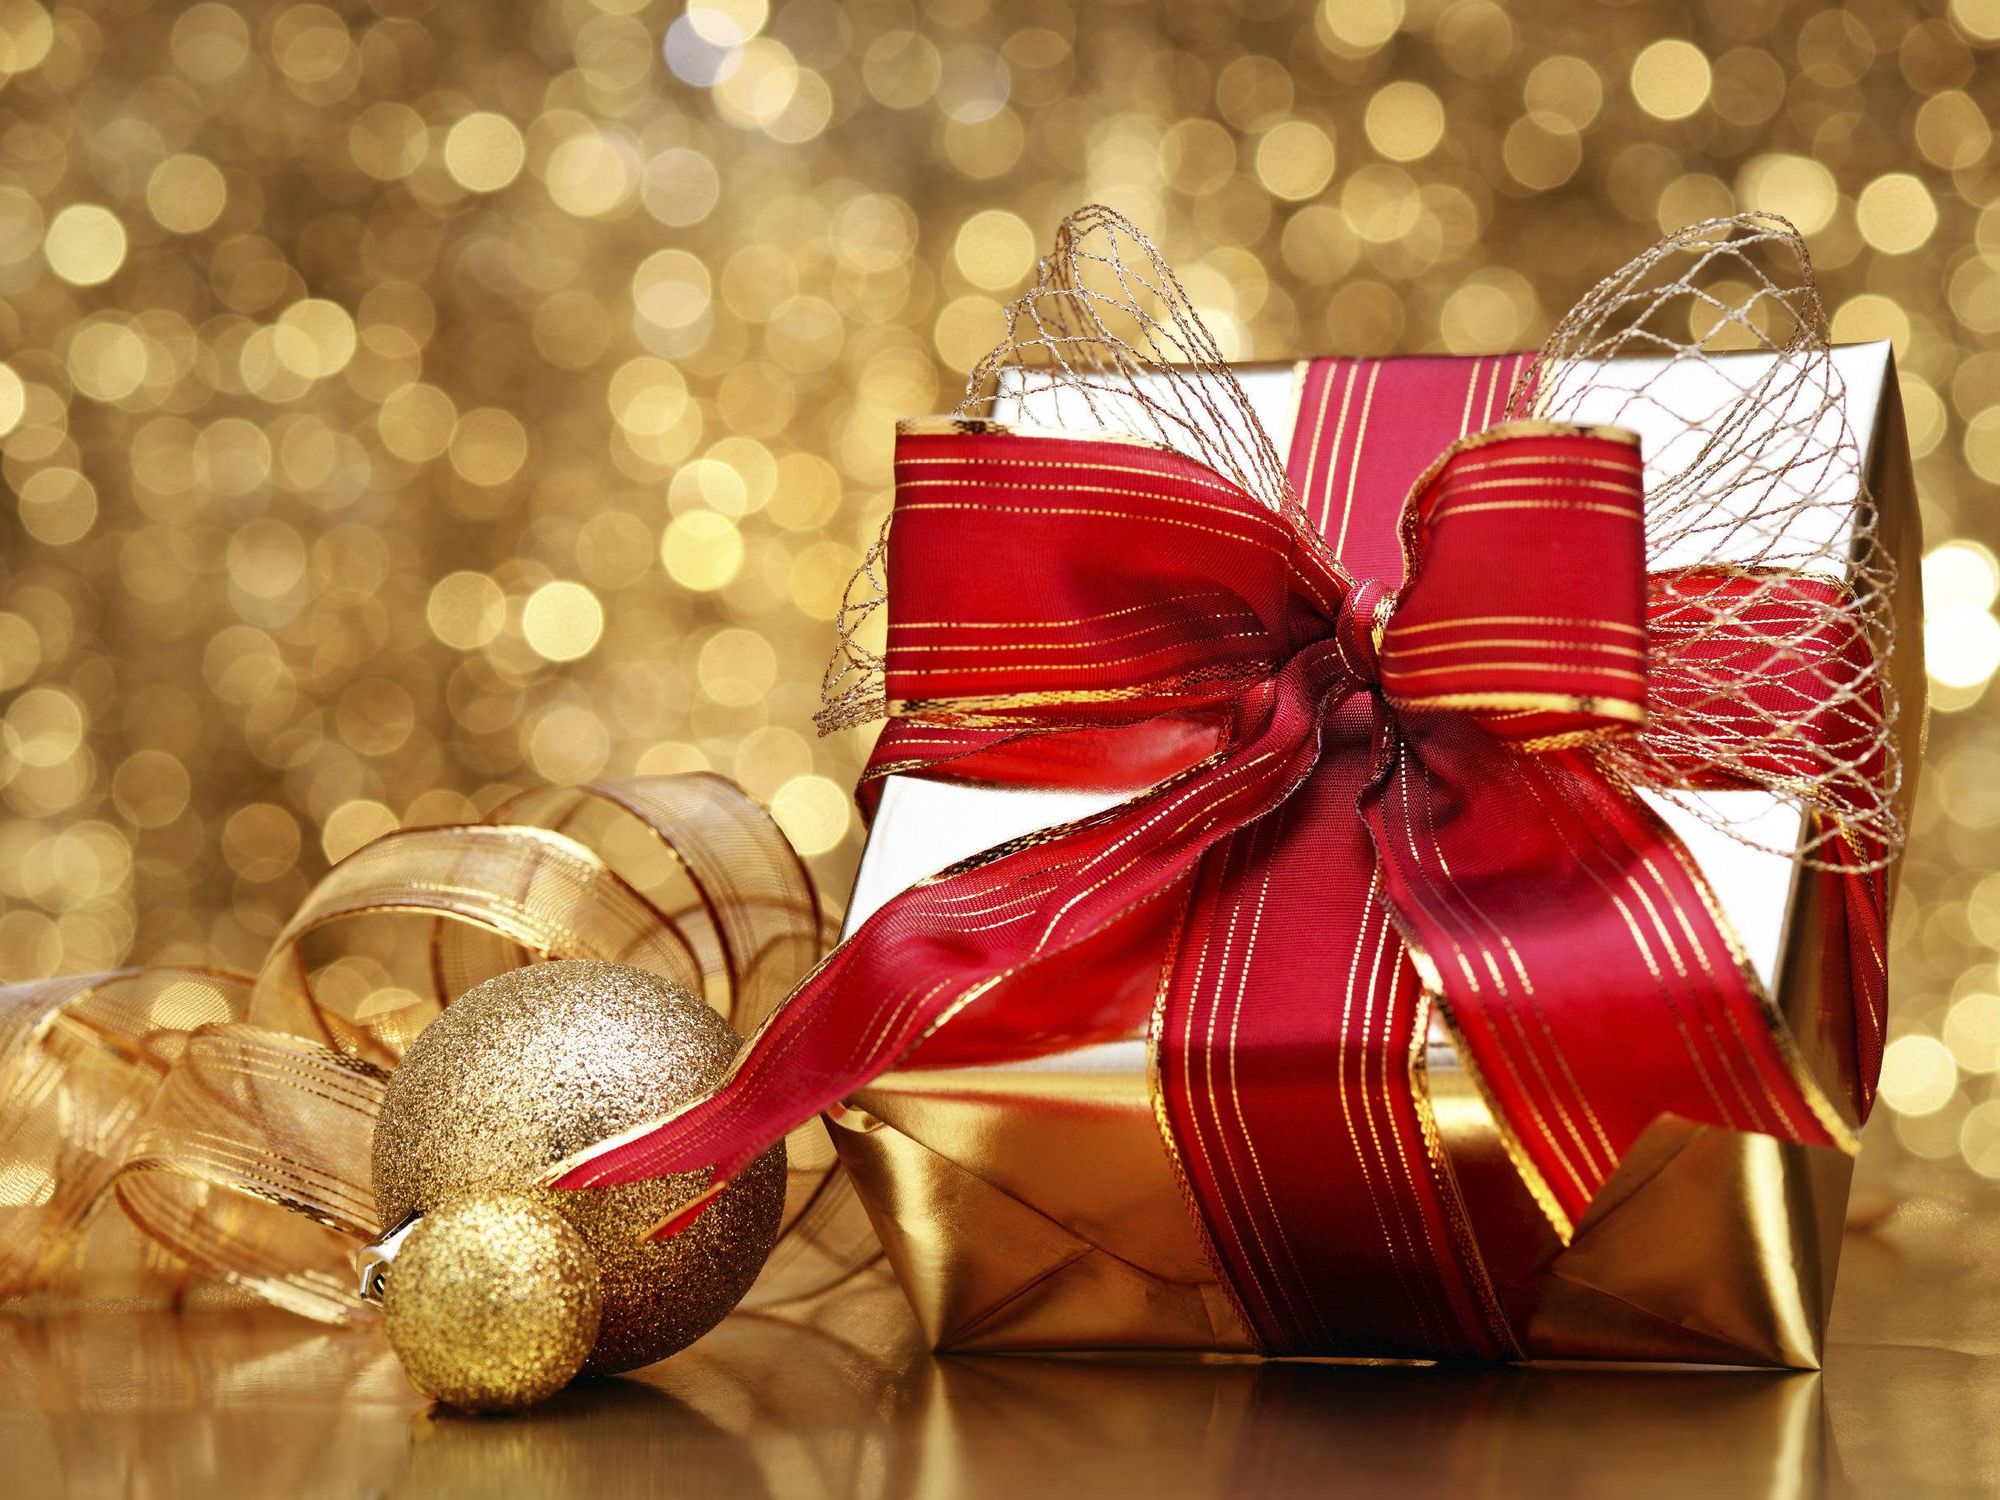 Holiday gift wrapped in gold with red bow